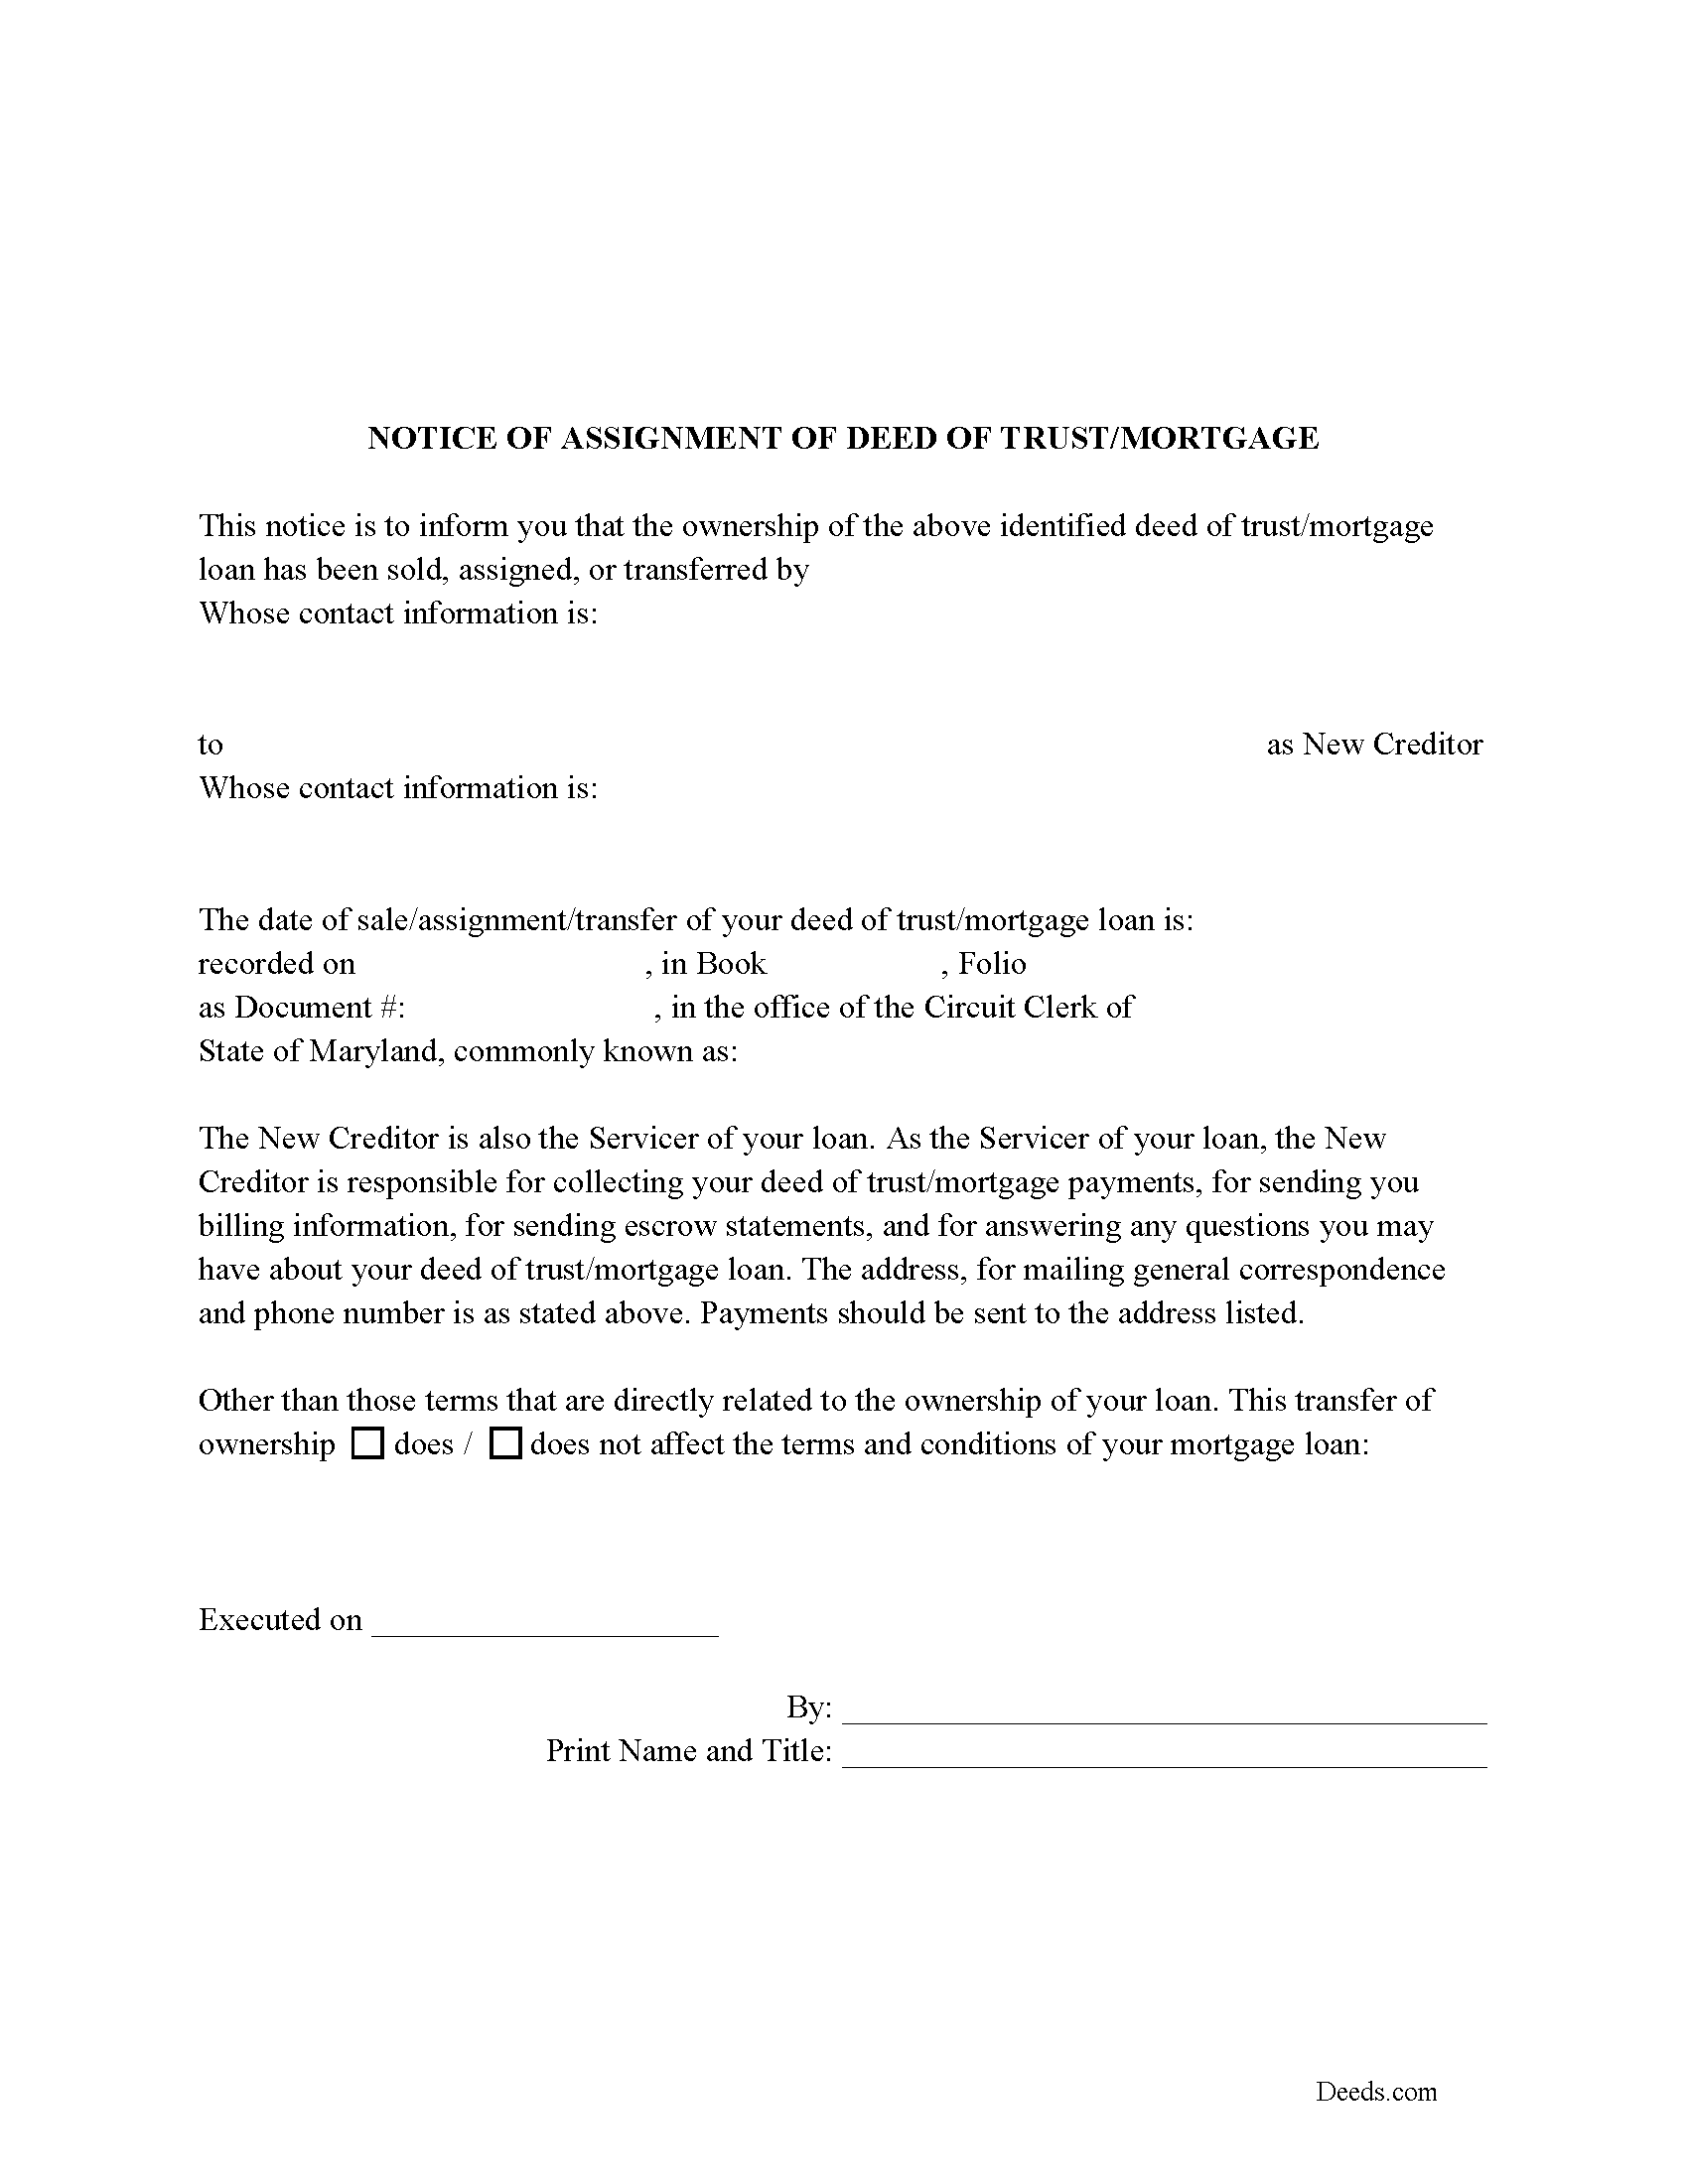 Notice of Assignment of Deed of Trust or Mortgage Form